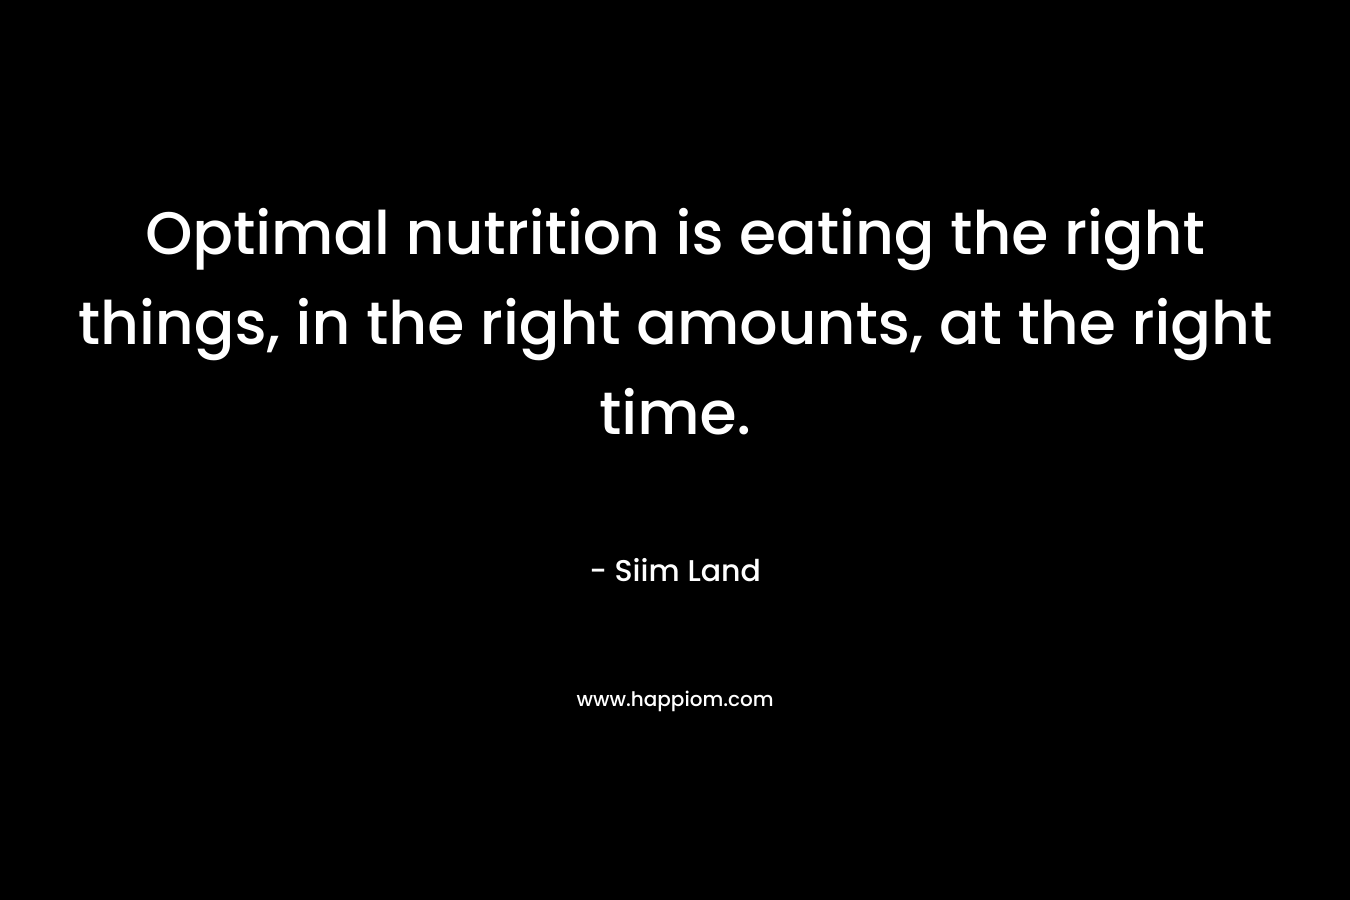 Optimal nutrition is eating the right things, in the right amounts, at the right time. – Siim Land